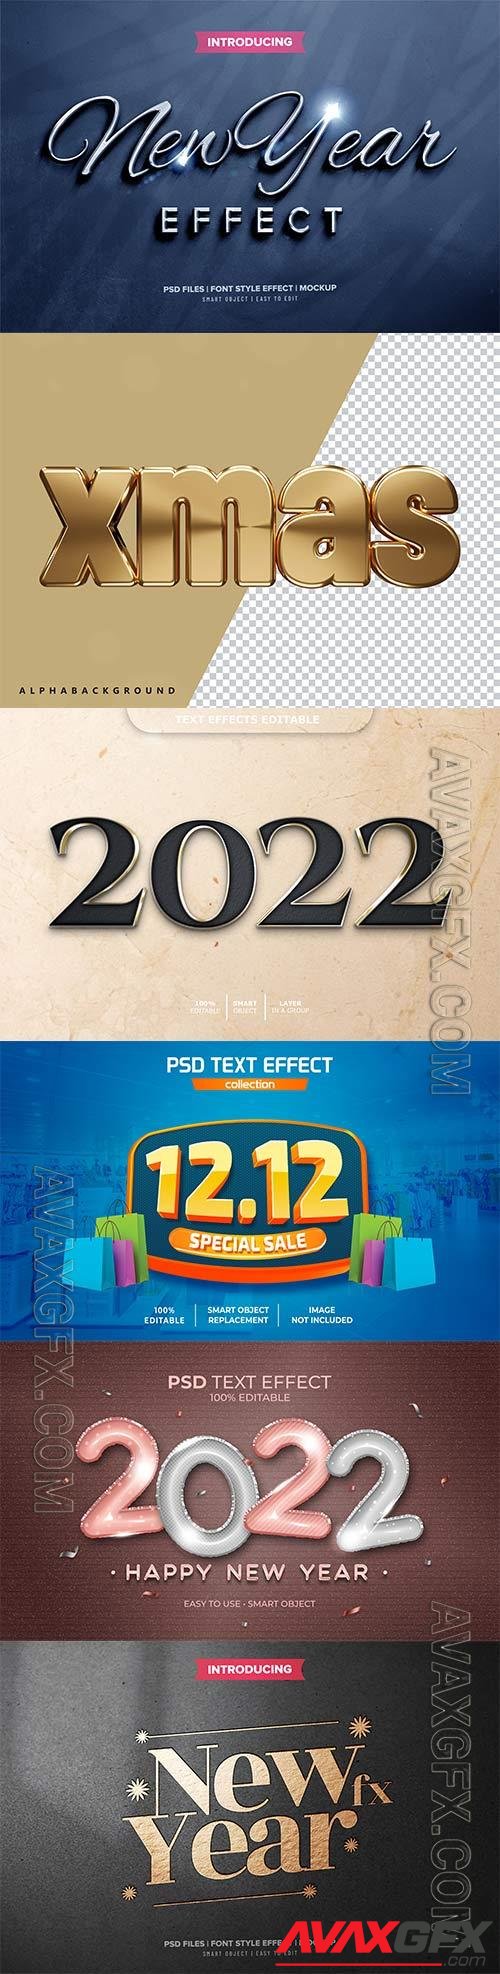 2022 new year 3d rendering isolated psd